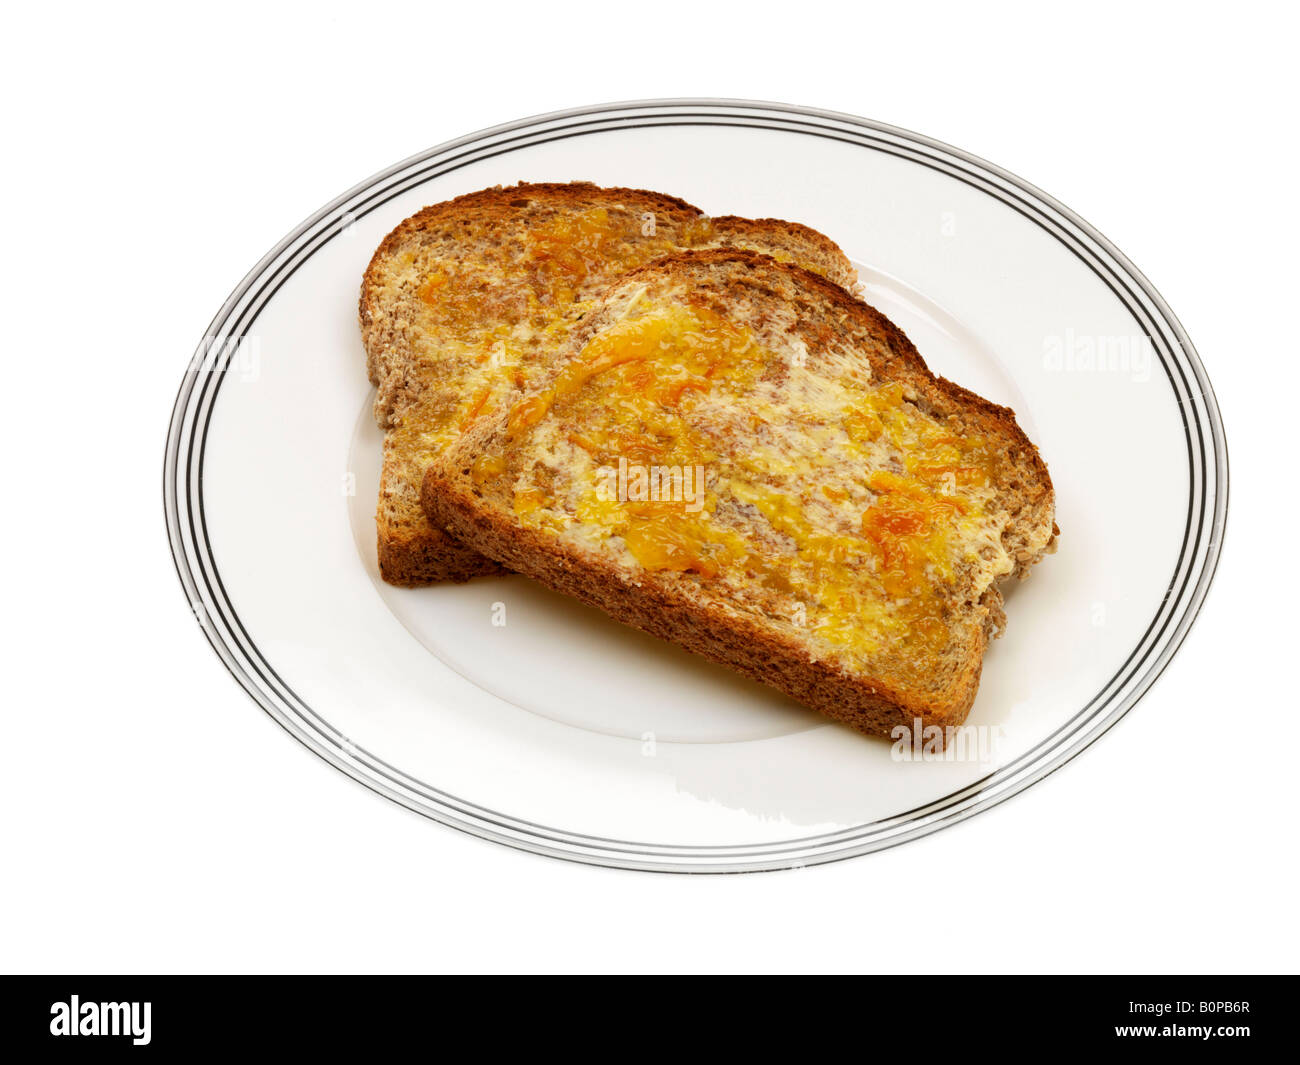 Fresh Sweet Wholemeal Toast With Marmalade Isolated Against A White Background With A Clipping Path And No People Stock Photo